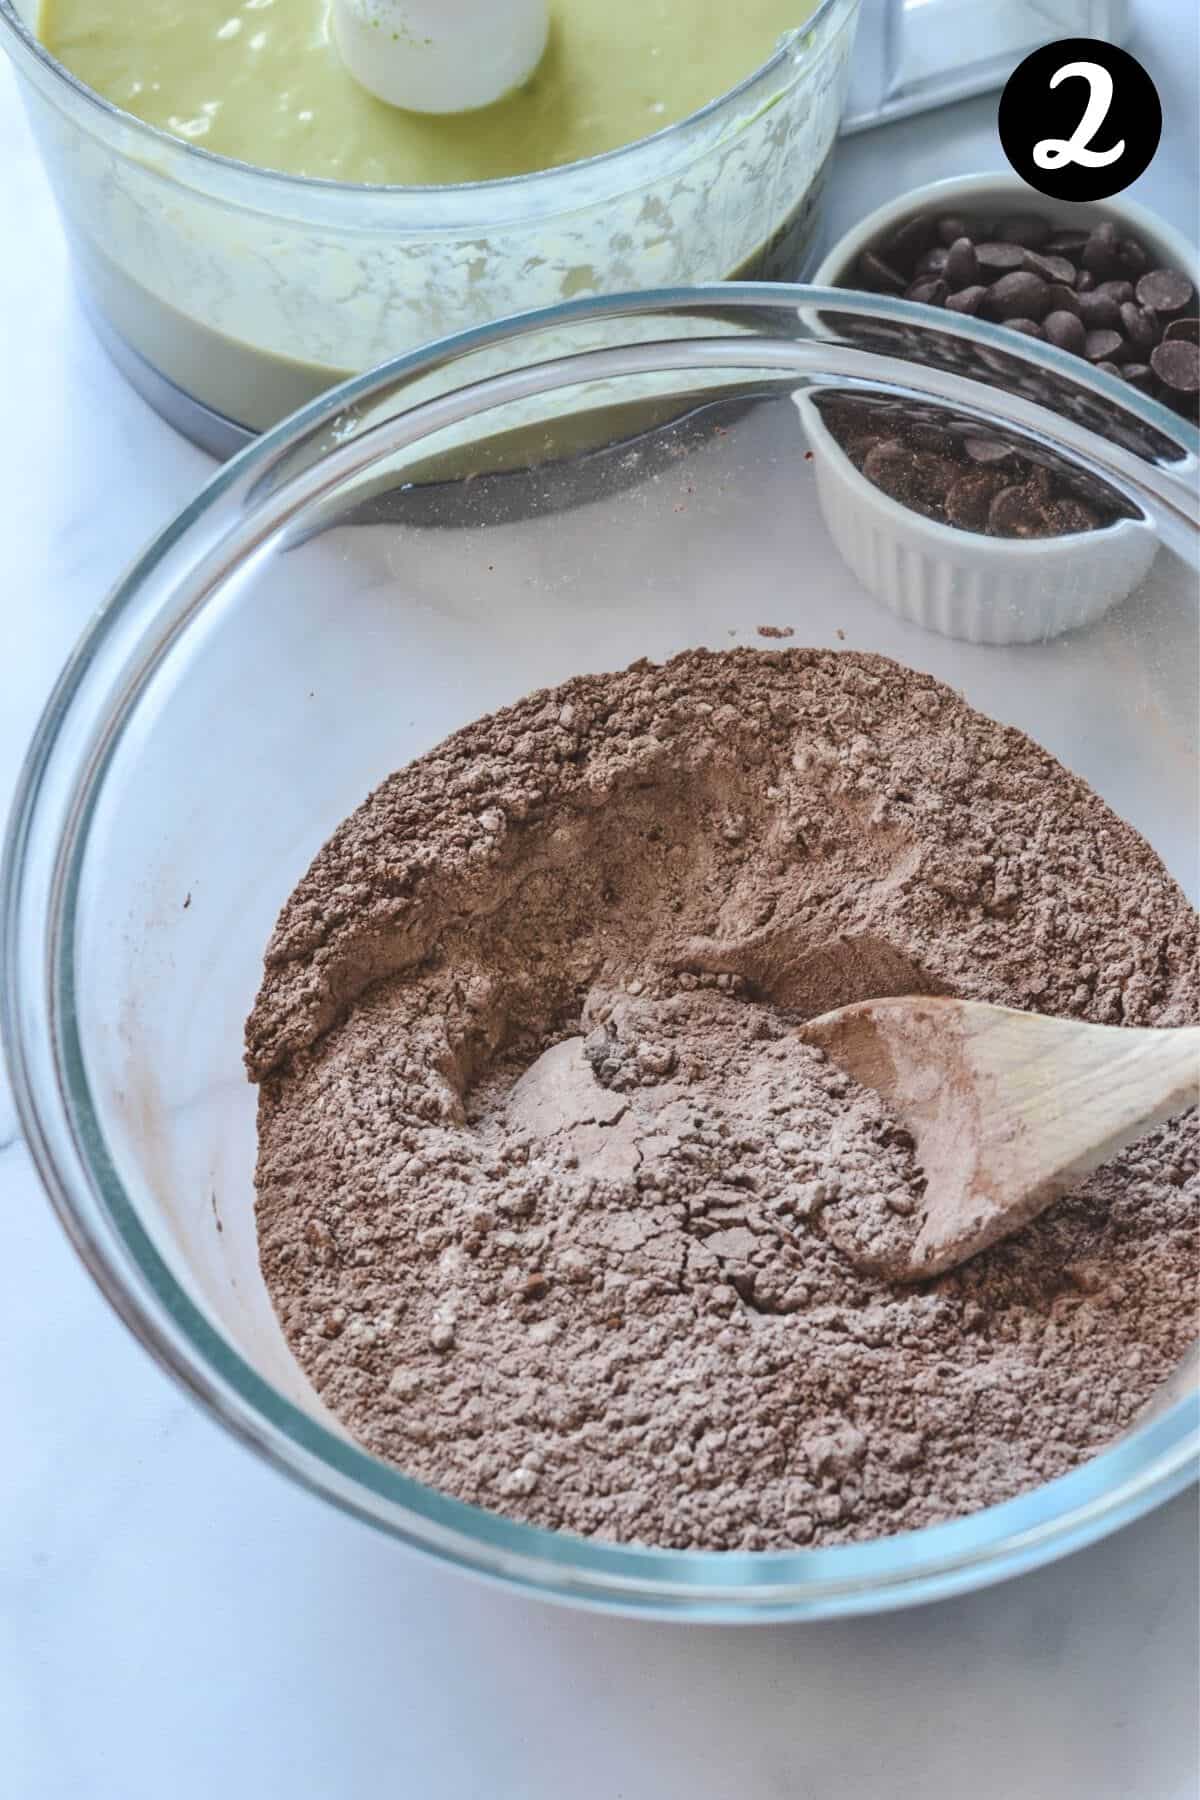 dry ingredients for chocolate muffins in a glass bowl with a wooden spoon